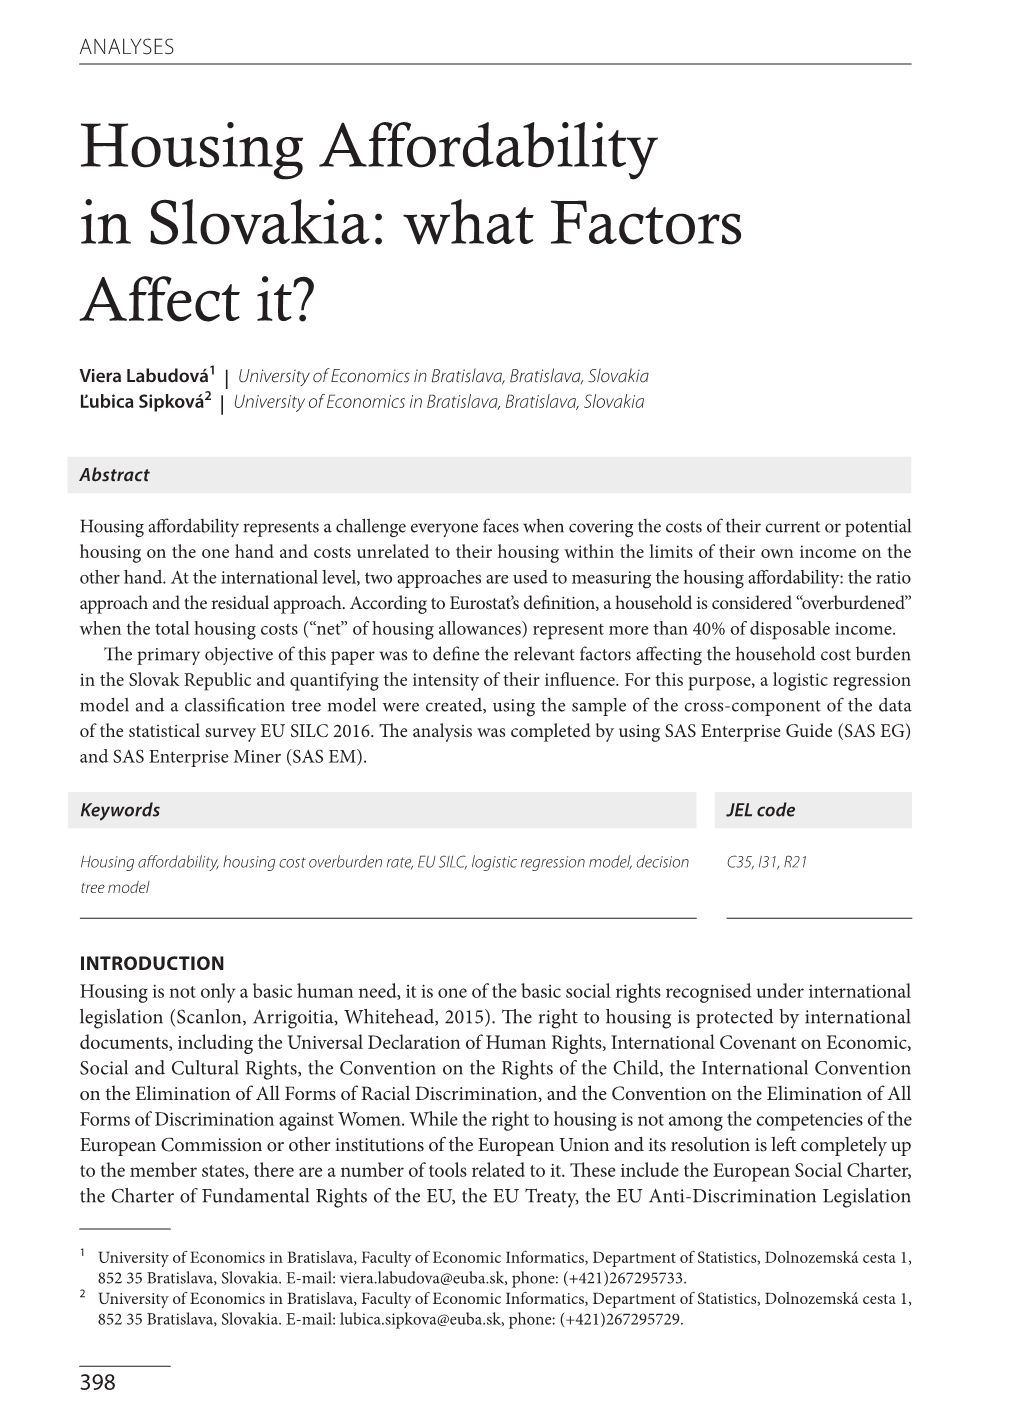 Housing Affordability in Slovakia: What Factors Affect It?